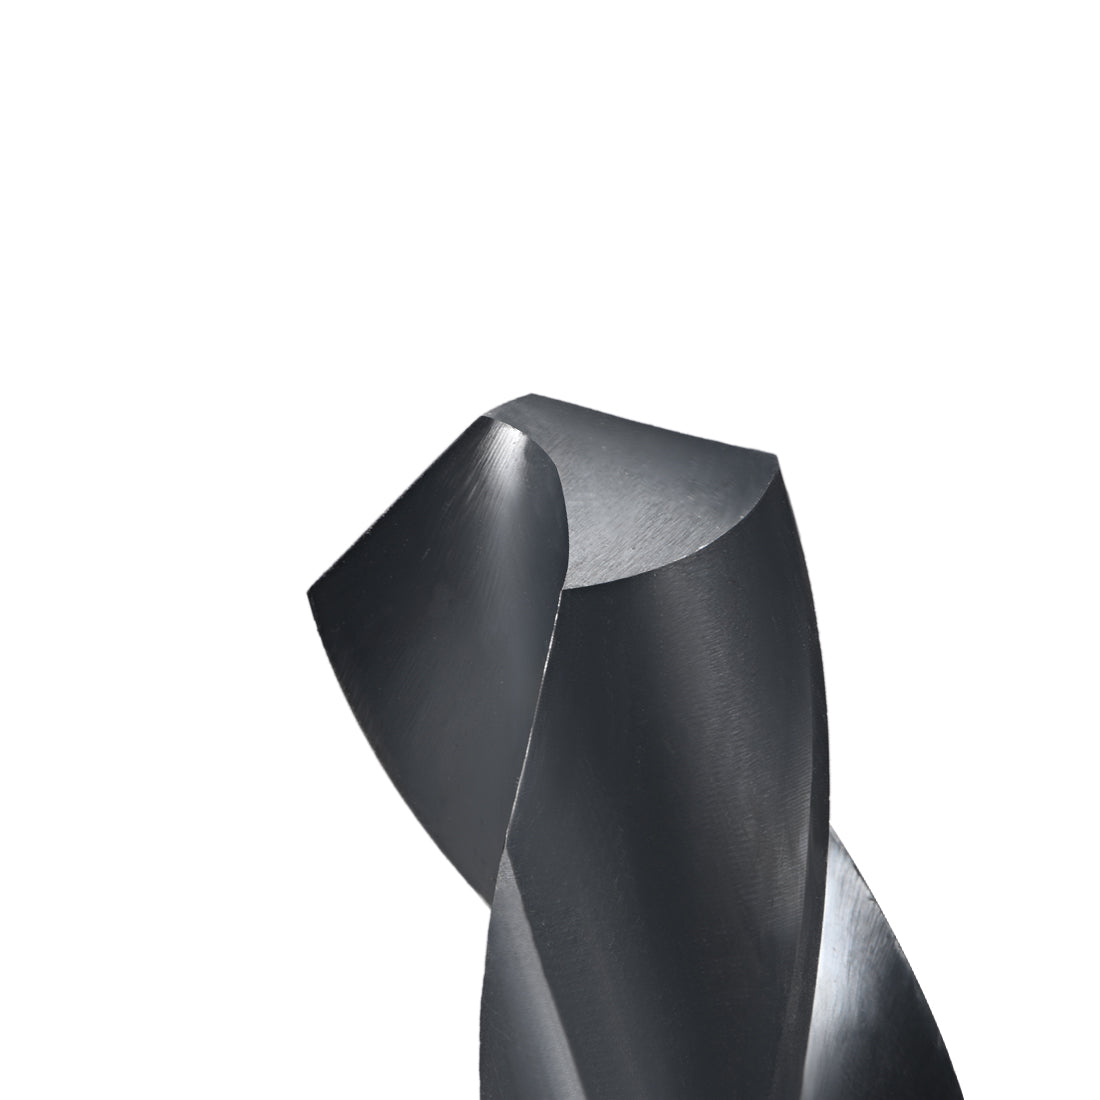 uxcell Uxcell Reduced Shank Drill Bit 28mm HSS 6542 Black Oxide with 1/2 Inch Straight Shank